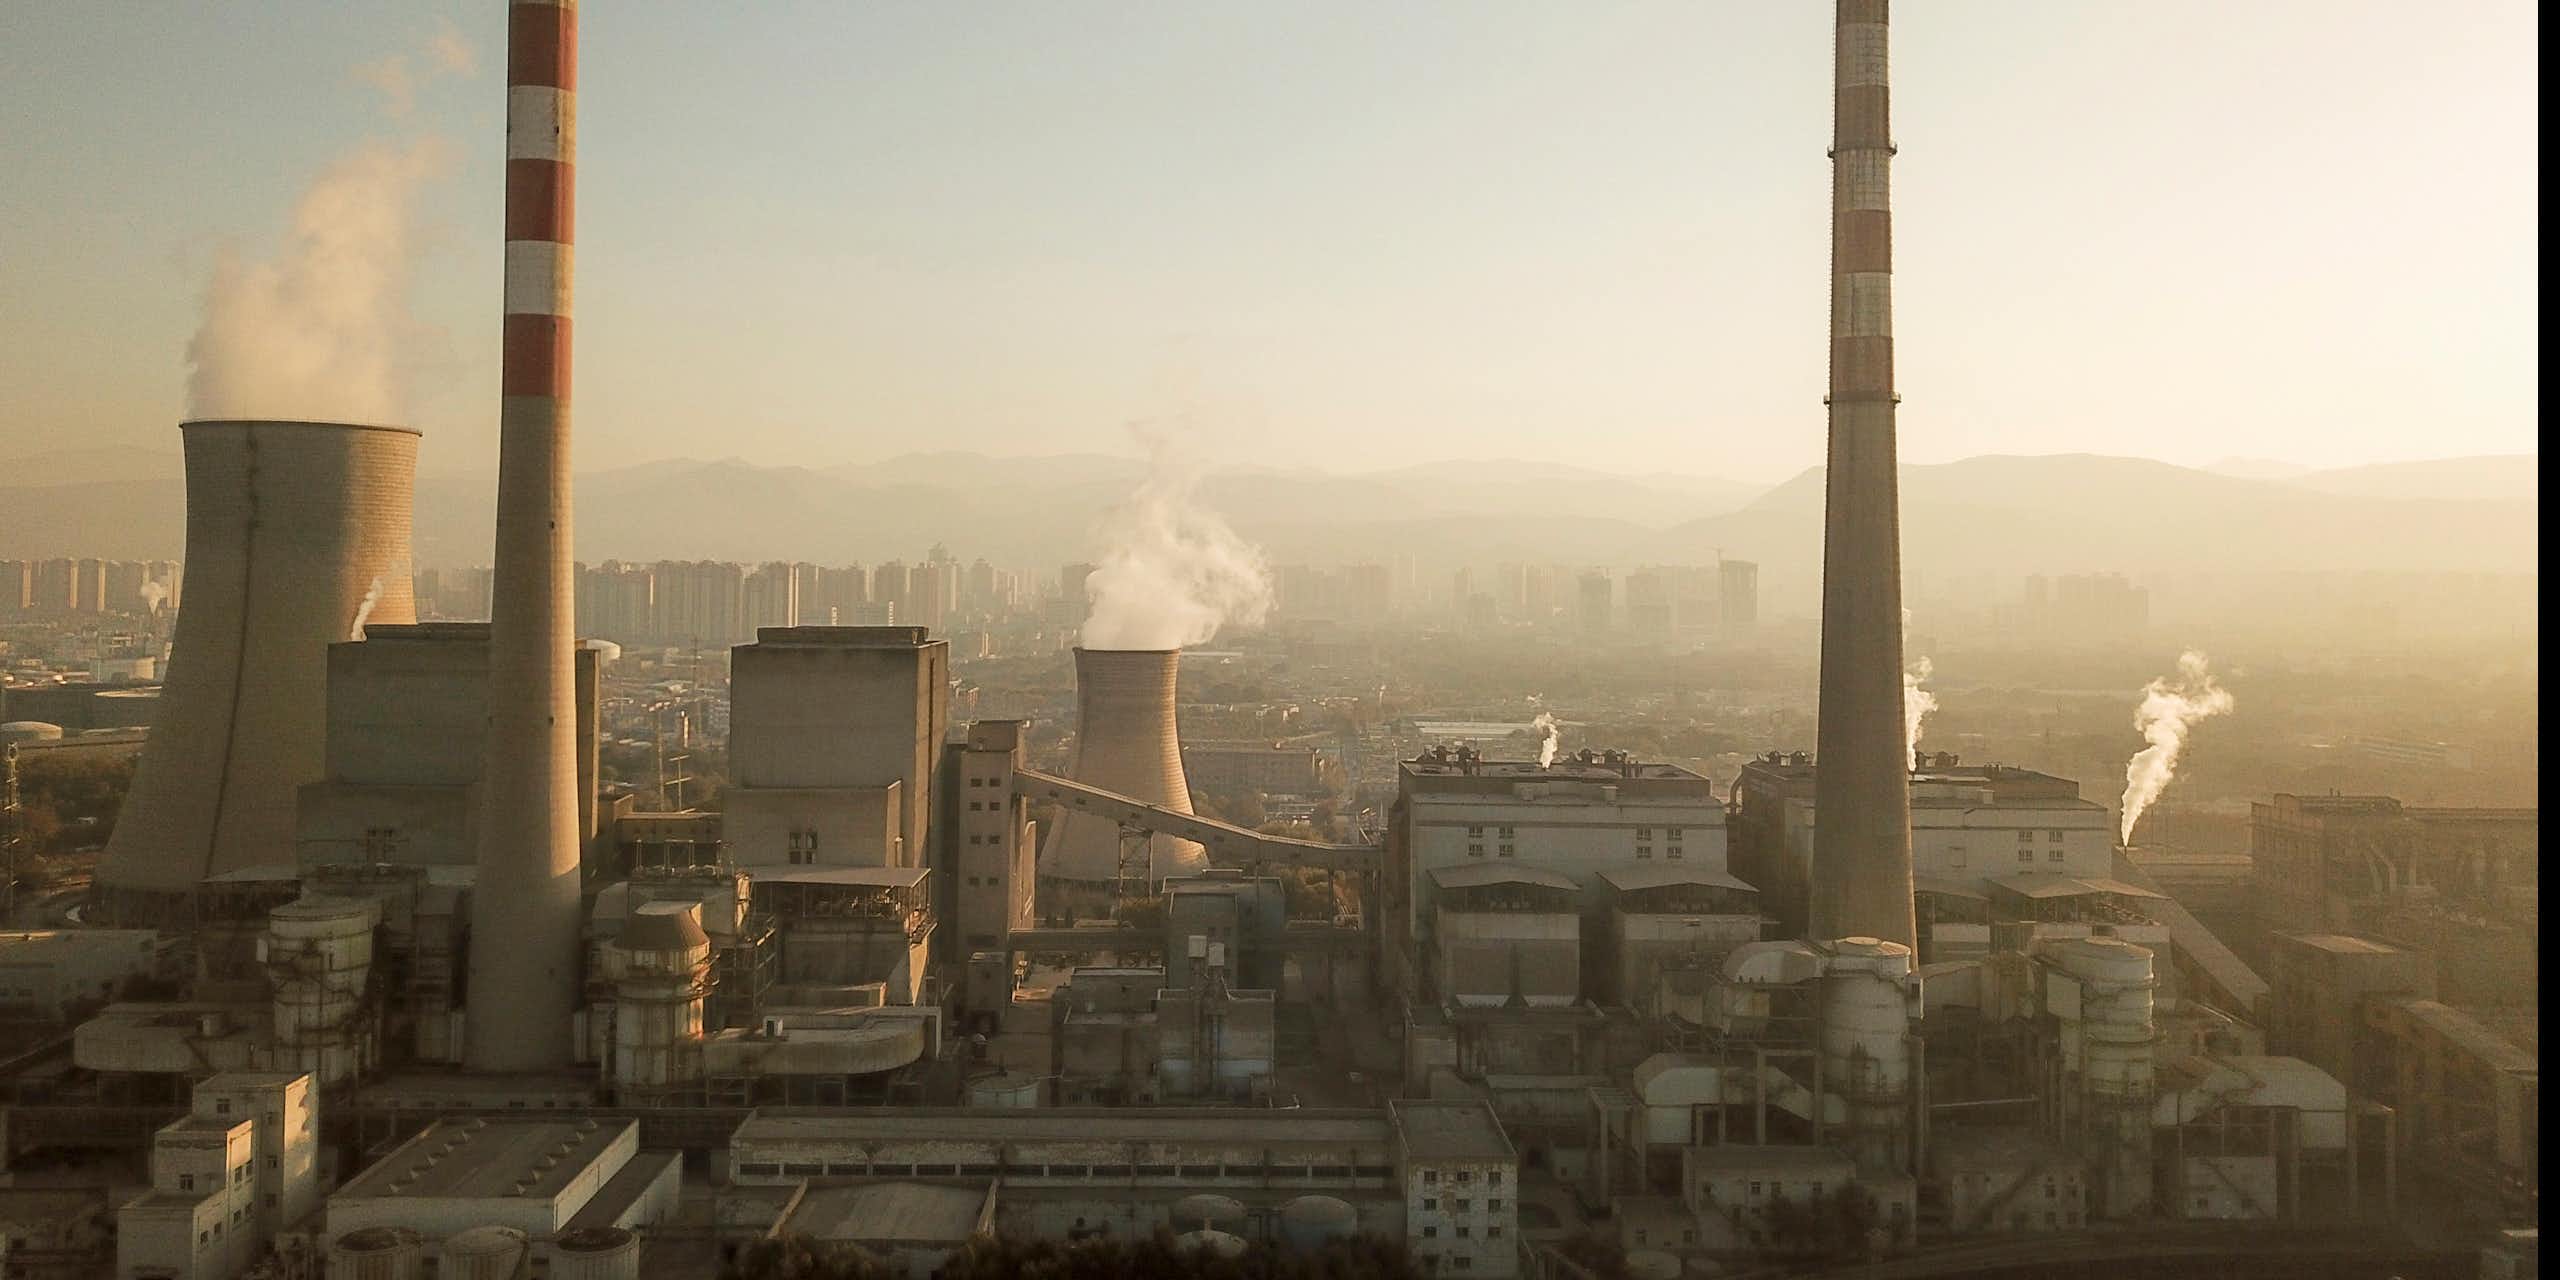 An aerial view of a coal-fired power station in Lanzhou in northwestern China's Gansu province